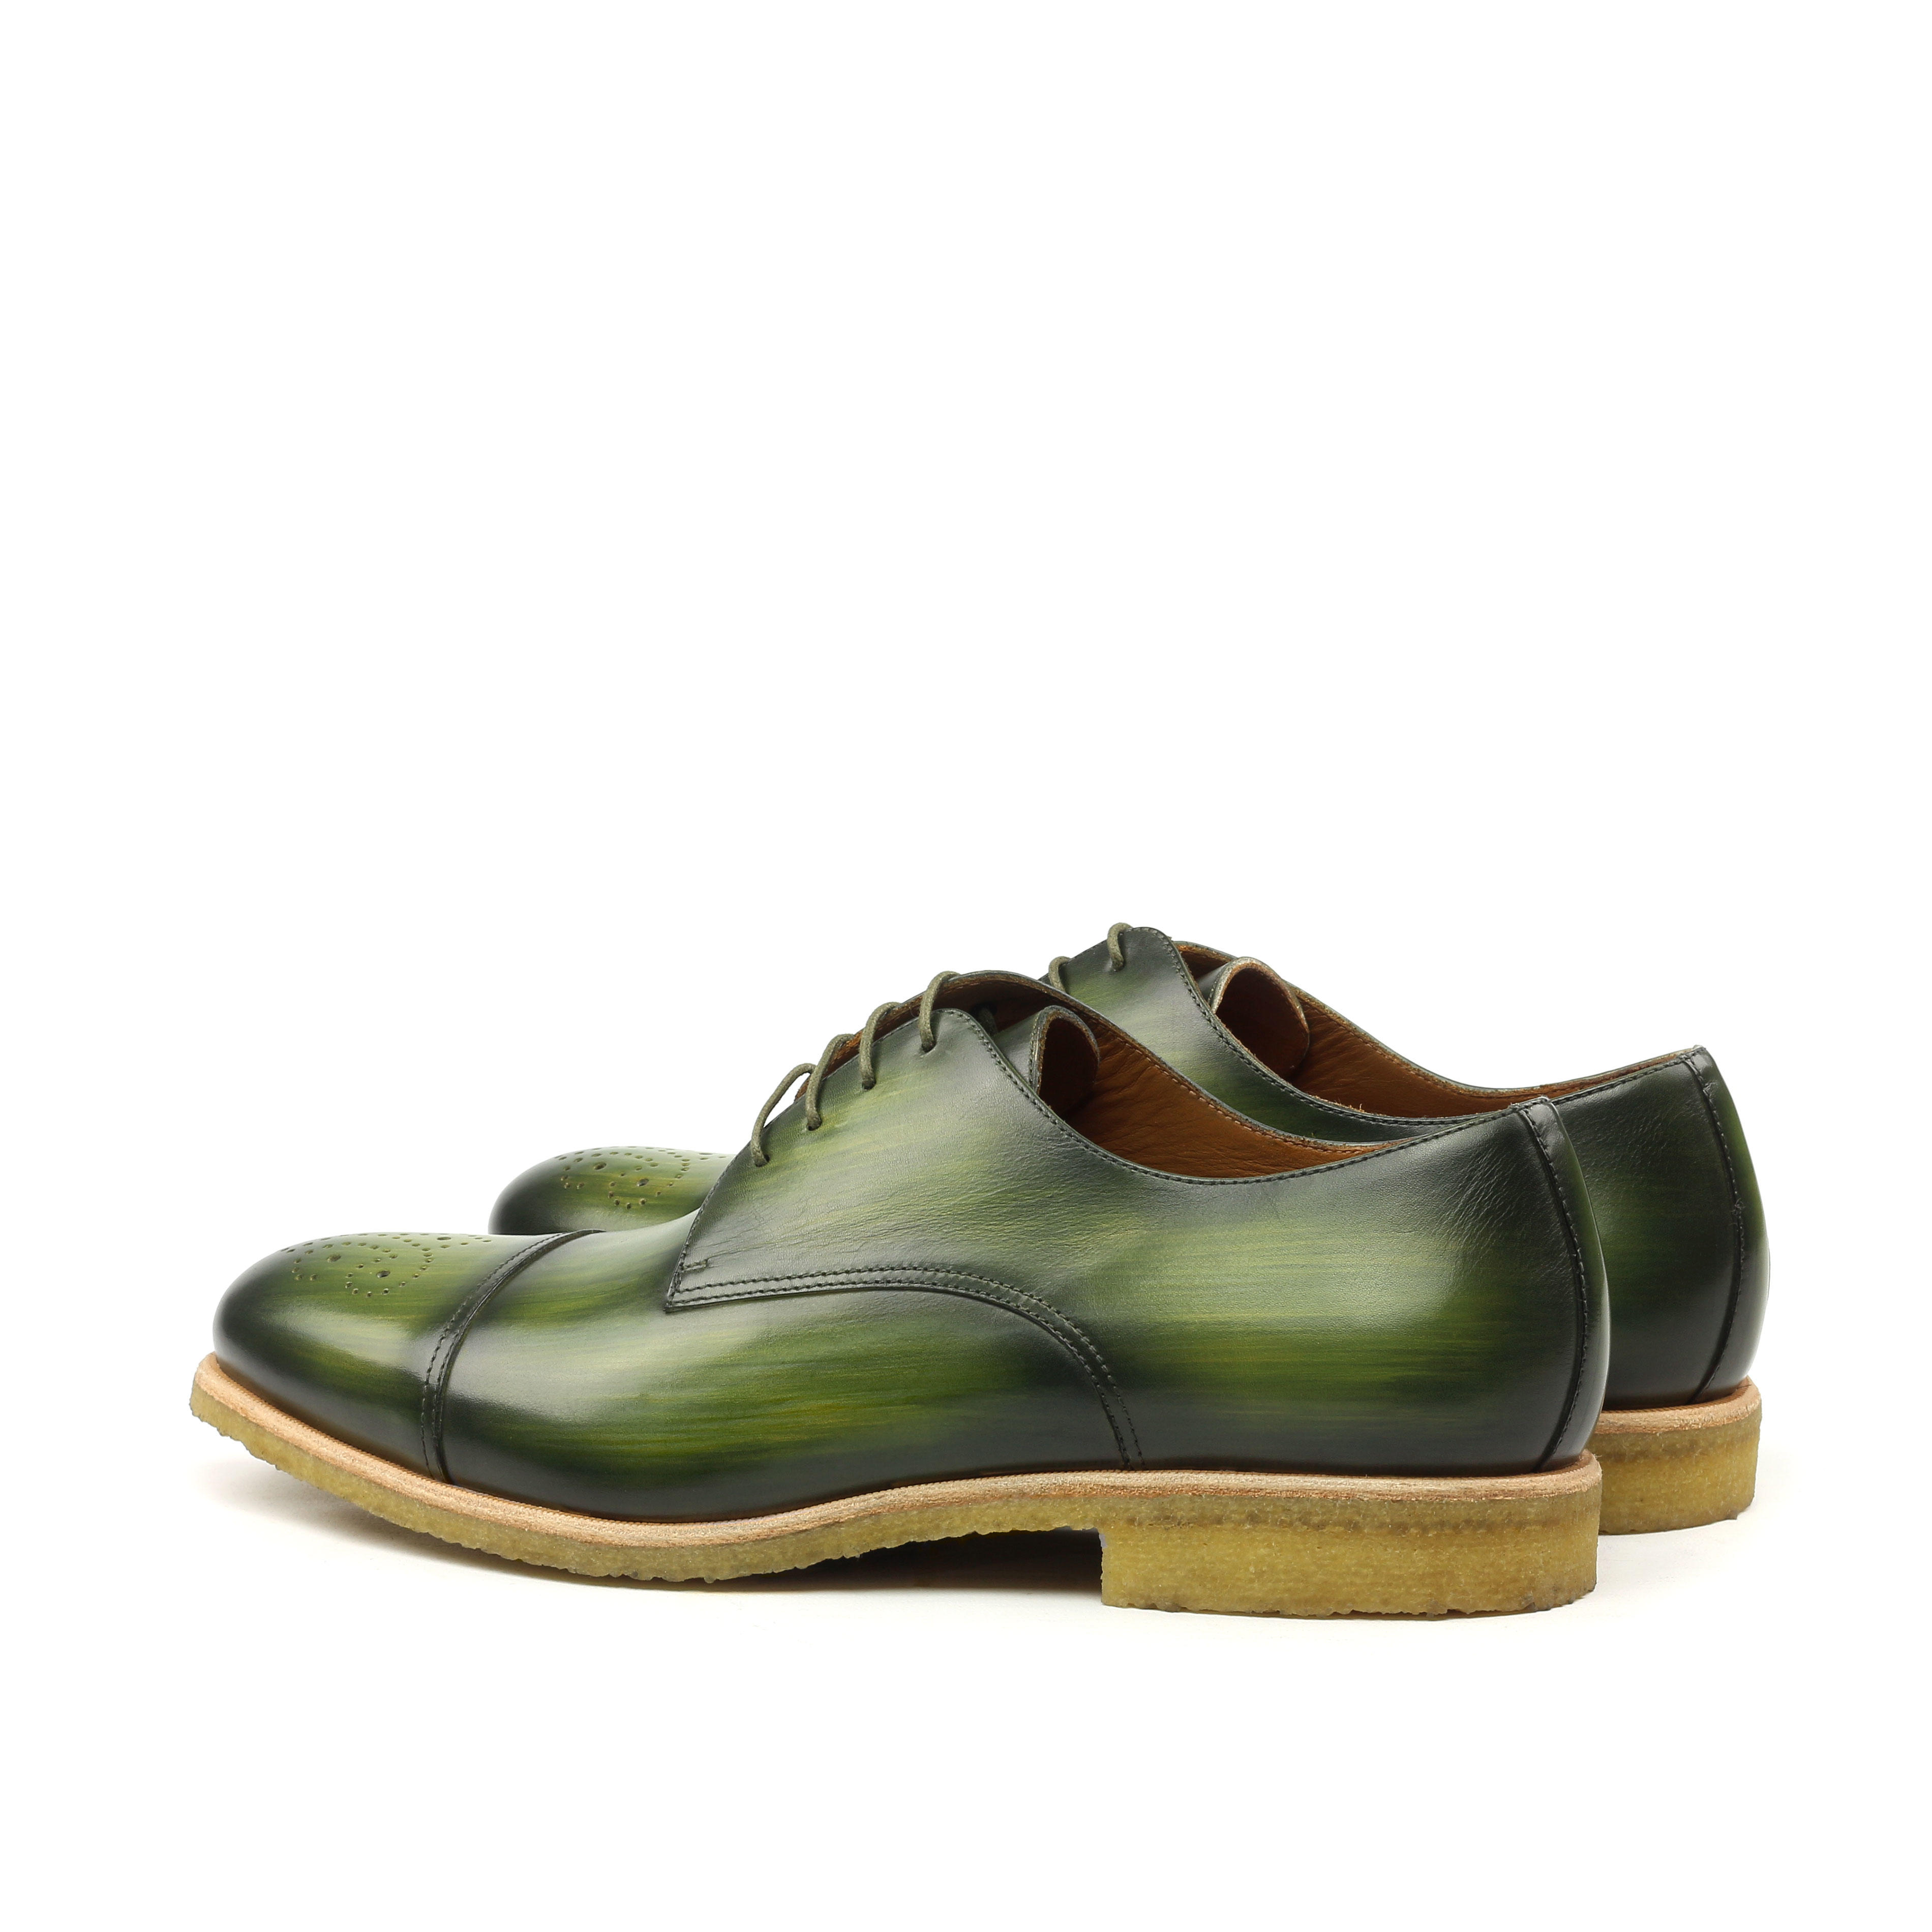 Manor of London 'The Derby'  Khaki Patina Punched Toe Shoe Luxury Custom Initials Monogrammed Back Side View